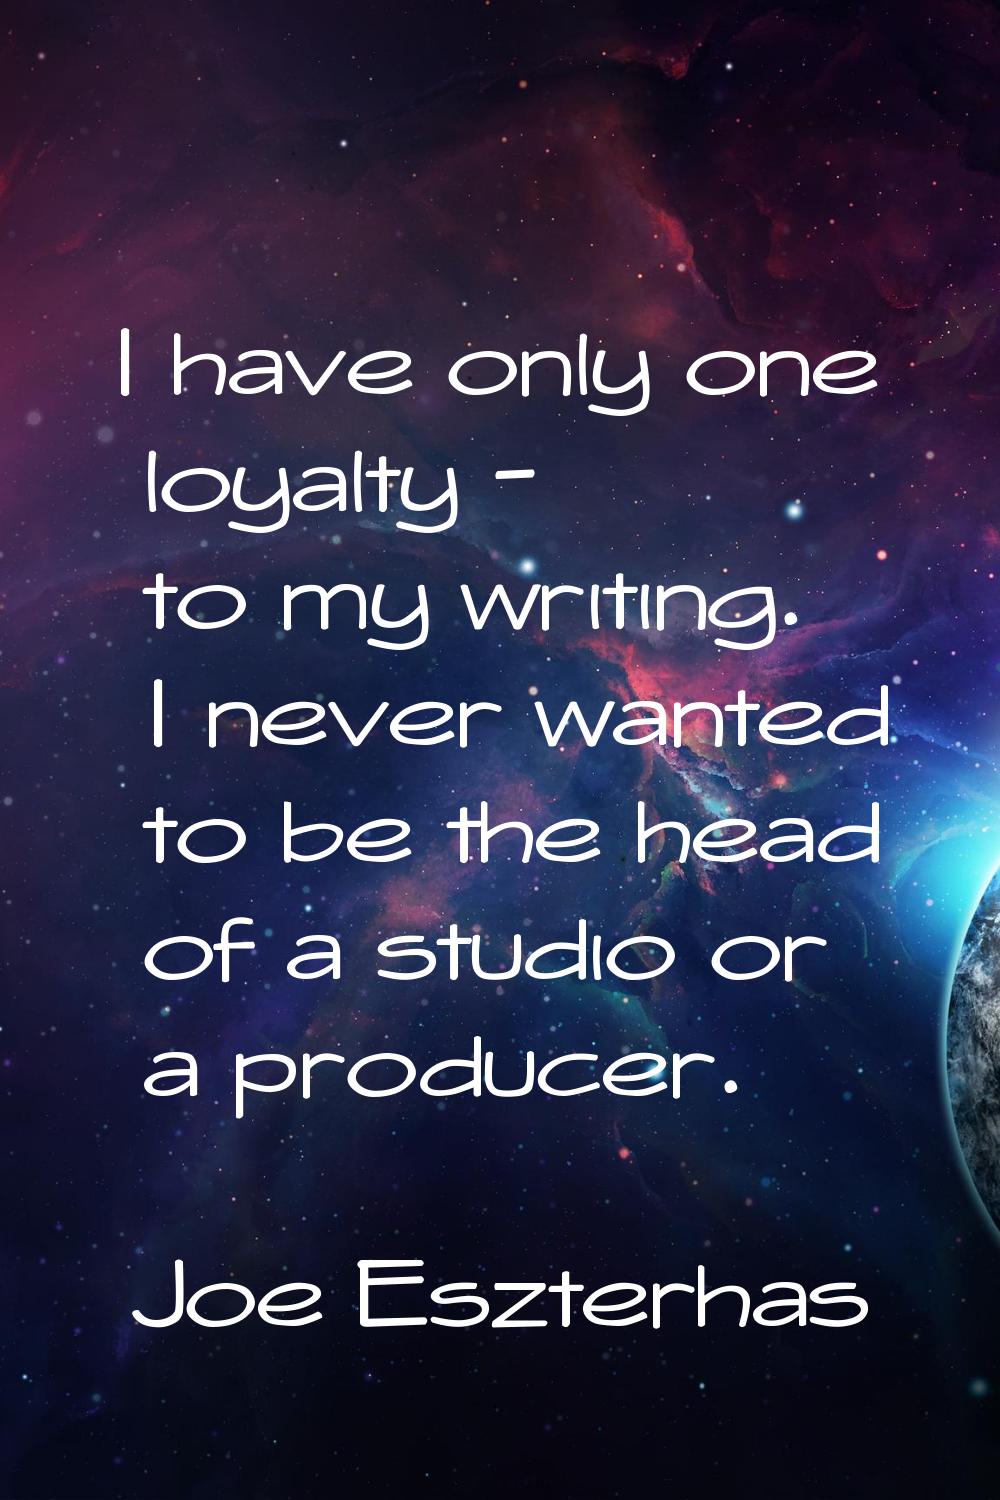 I have only one loyalty - to my writing. I never wanted to be the head of a studio or a producer.